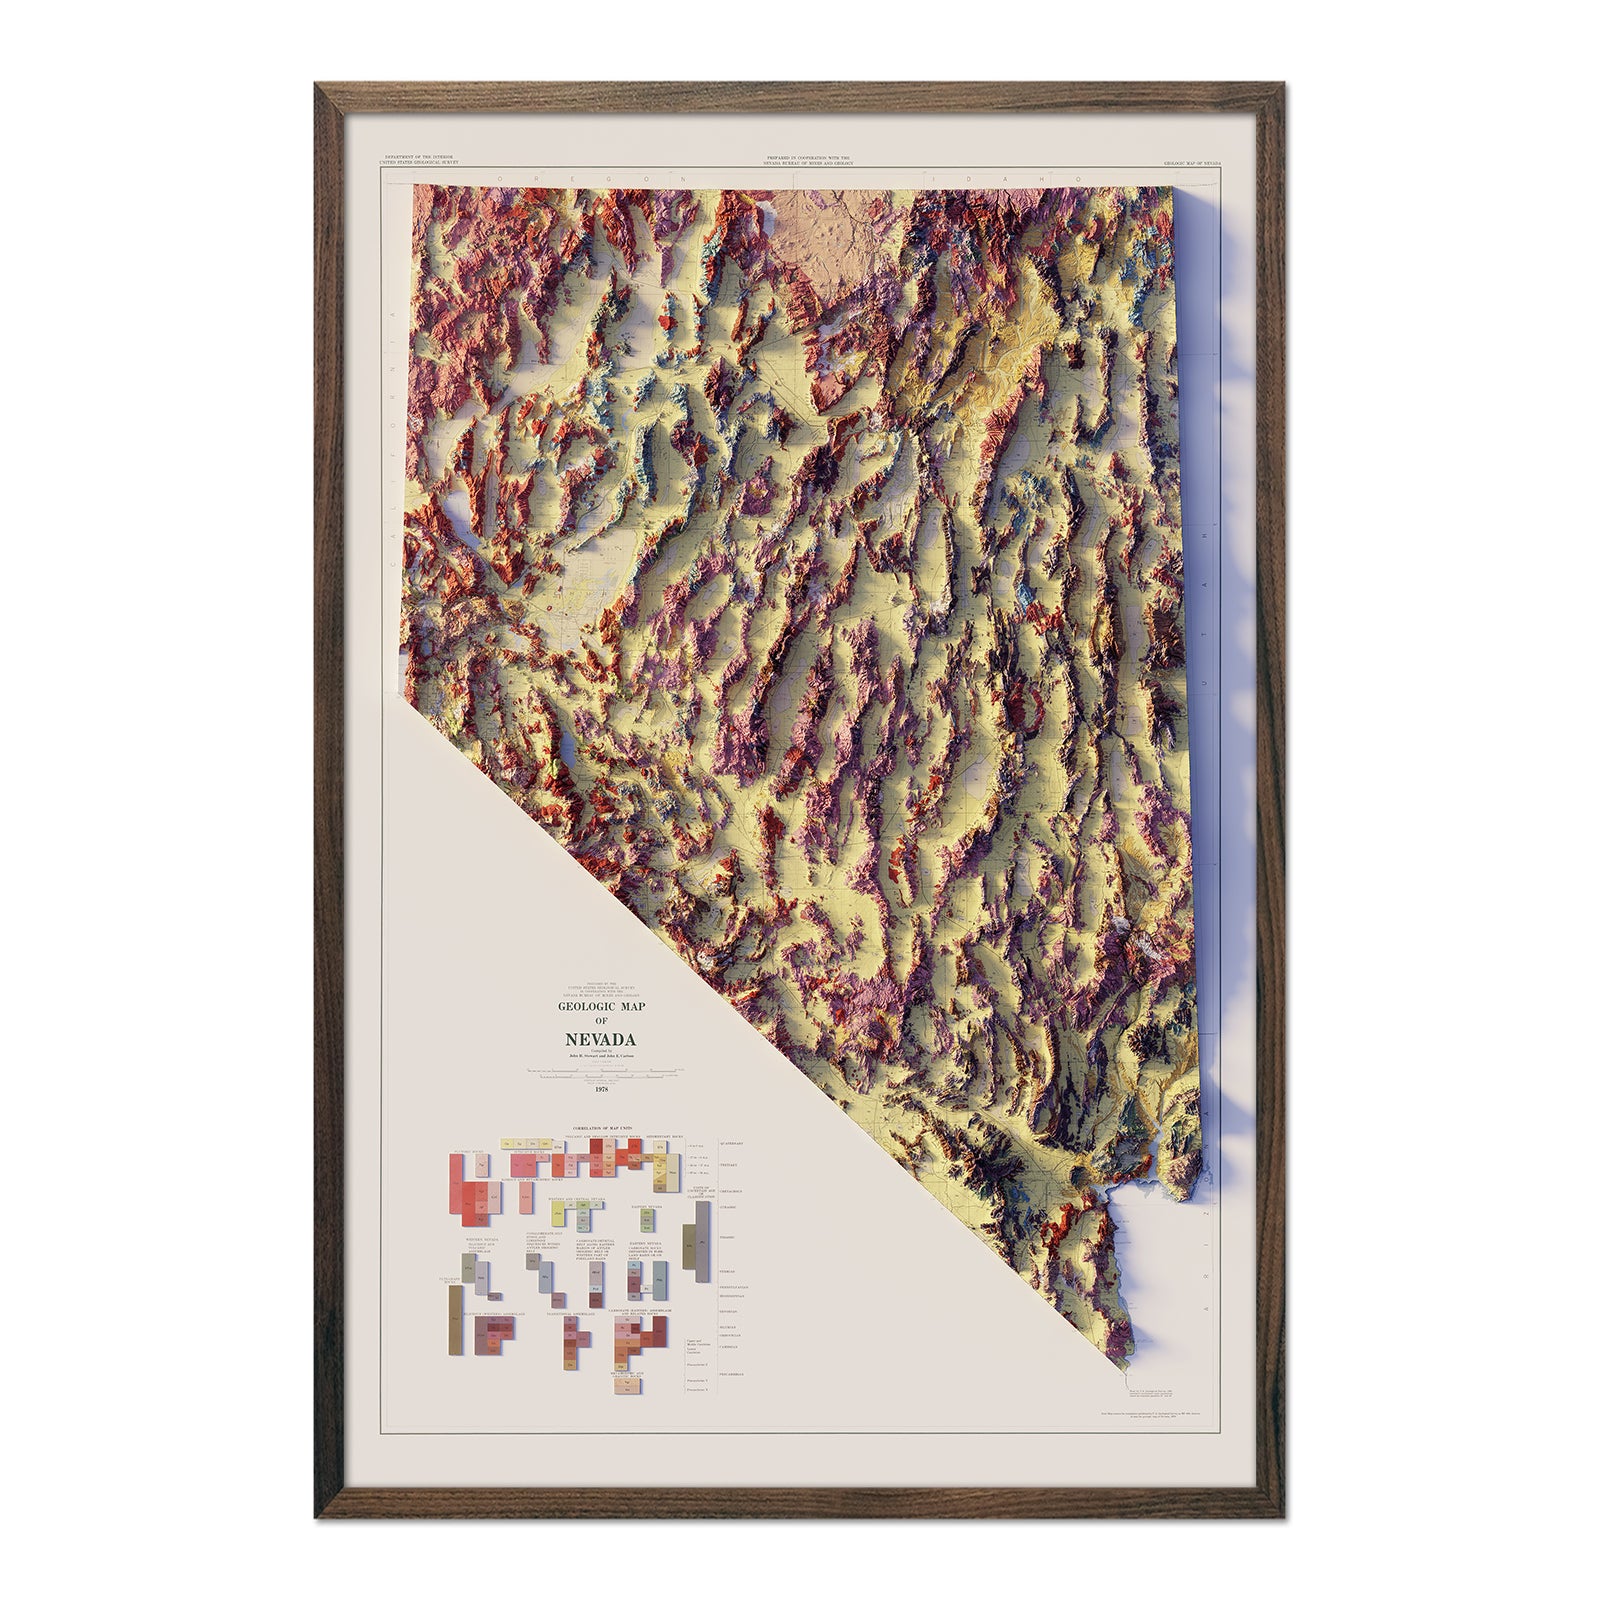 Nevada Relief Map - 1978